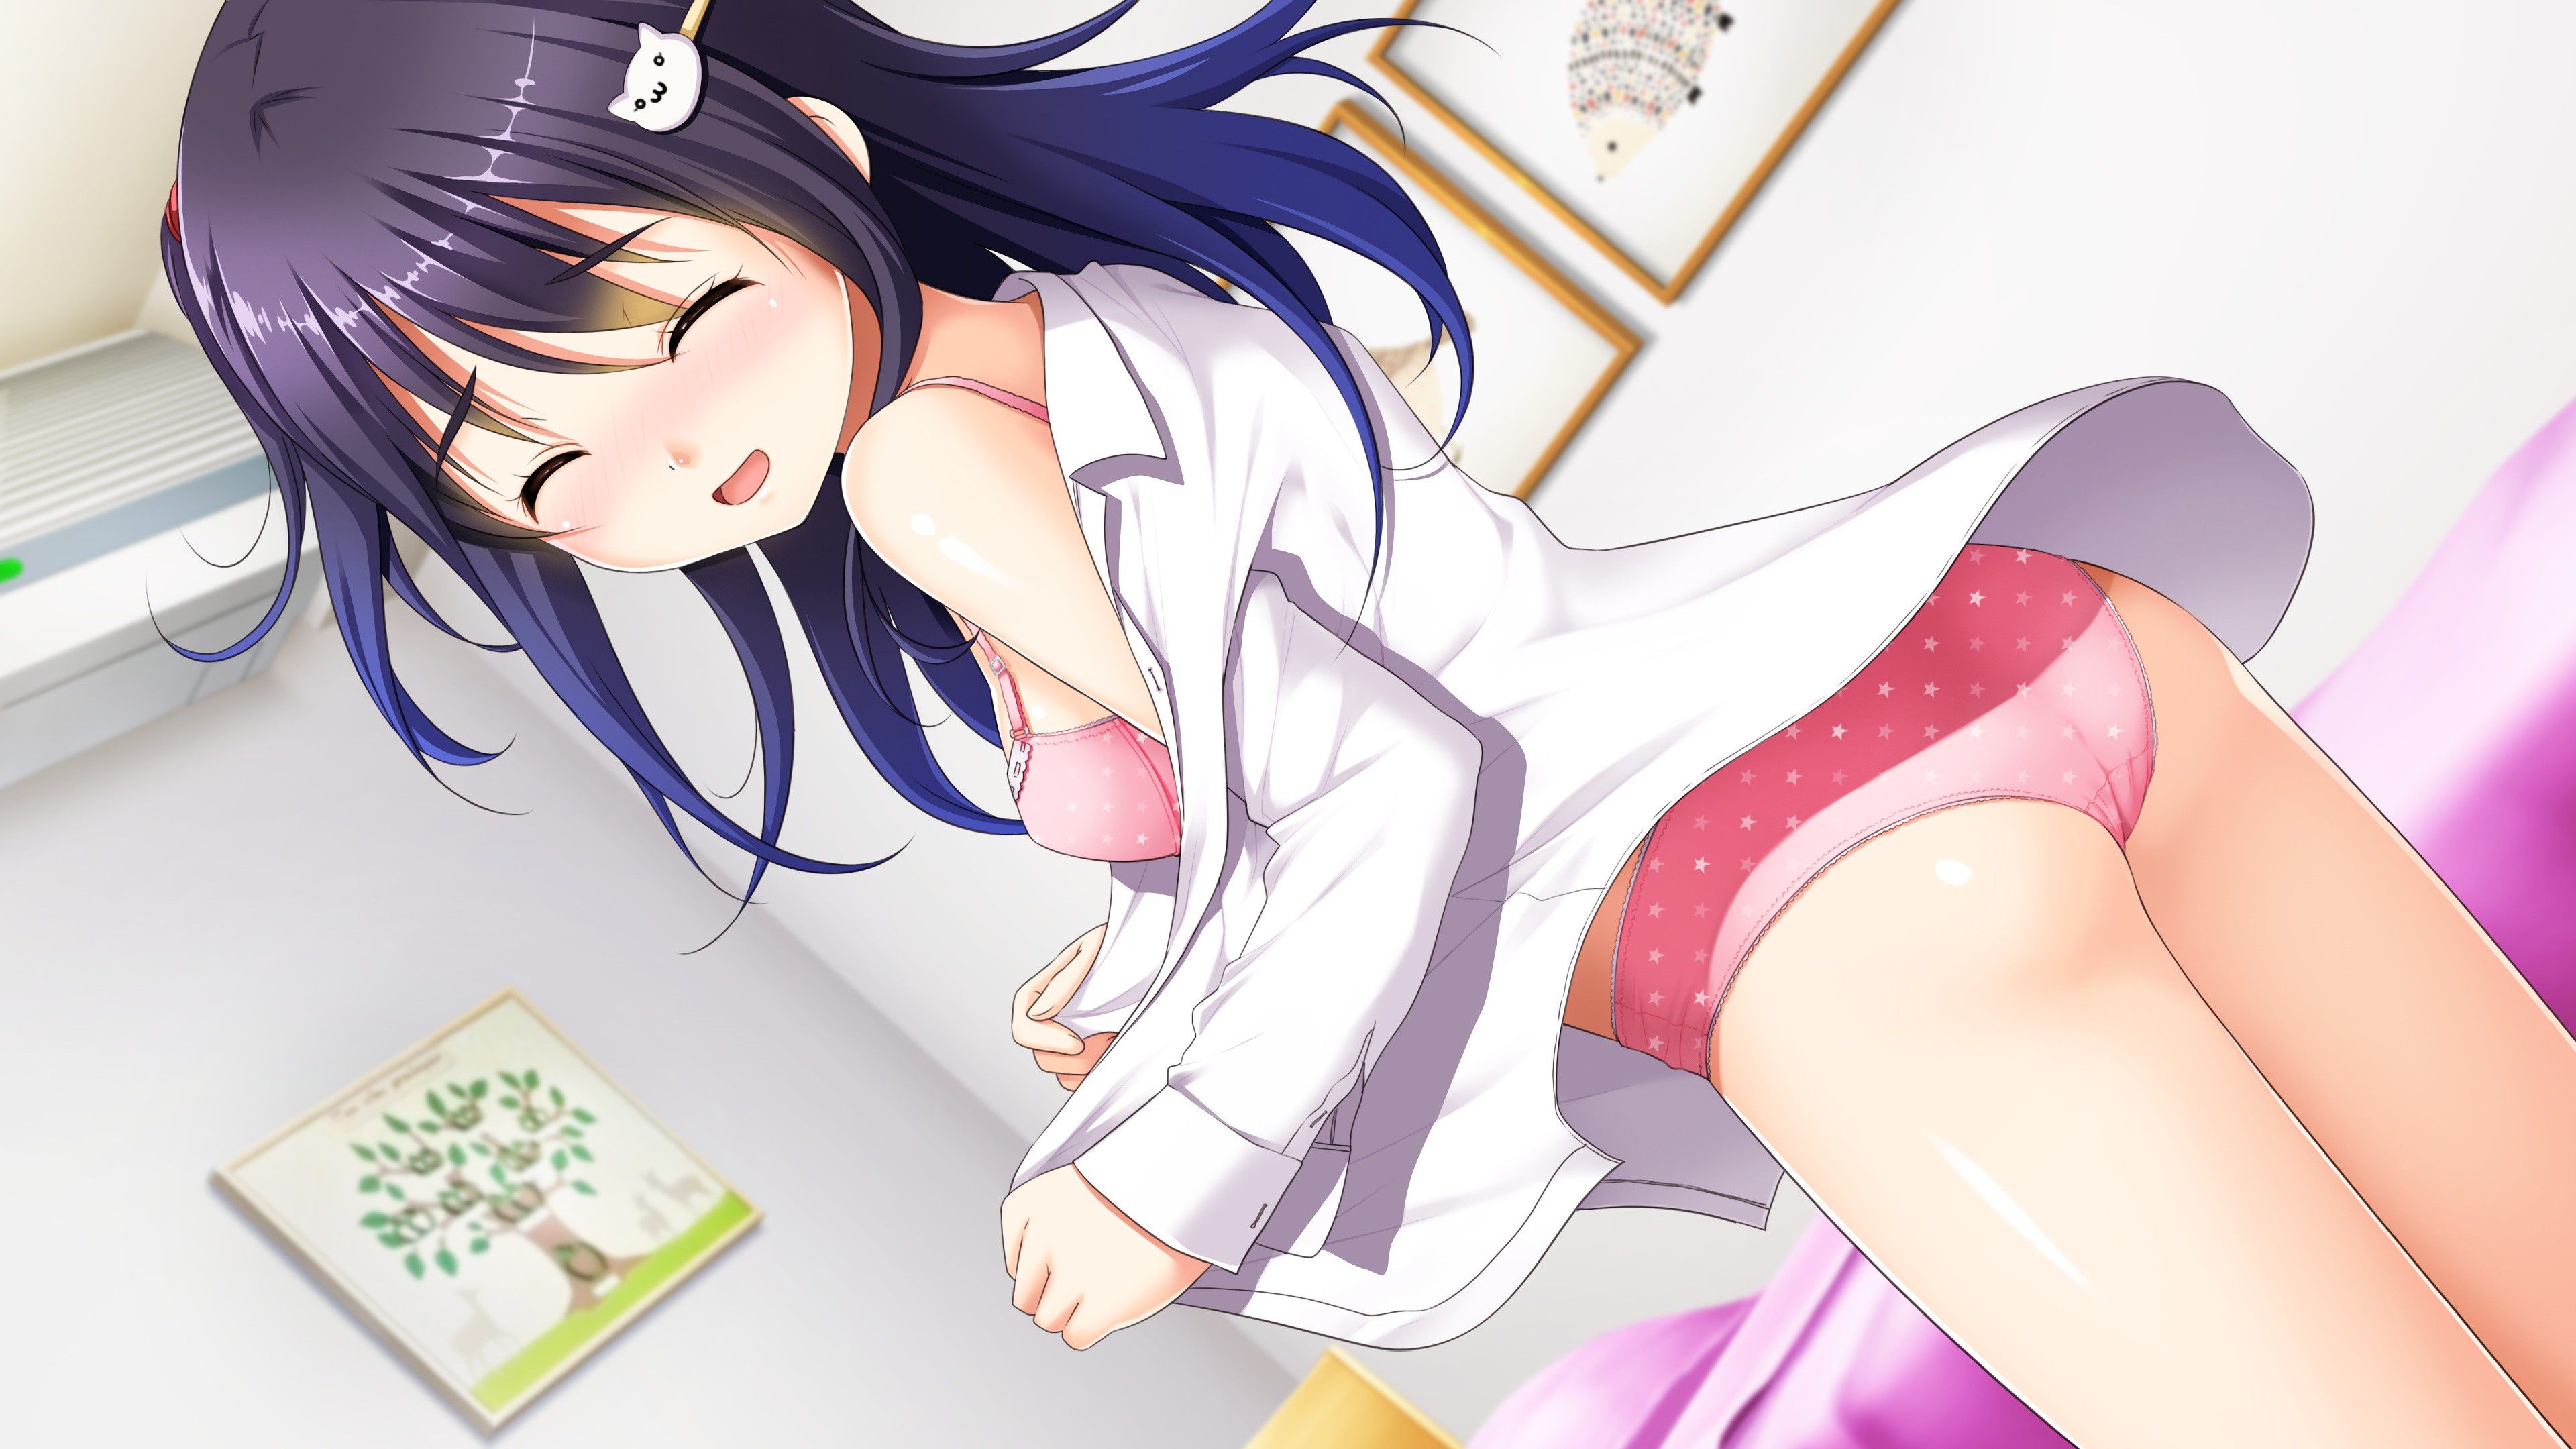 【Erotic Anime Summary】 Erotic image of a girl hiding and watching while changing clothes 【Secondary erotic】 9